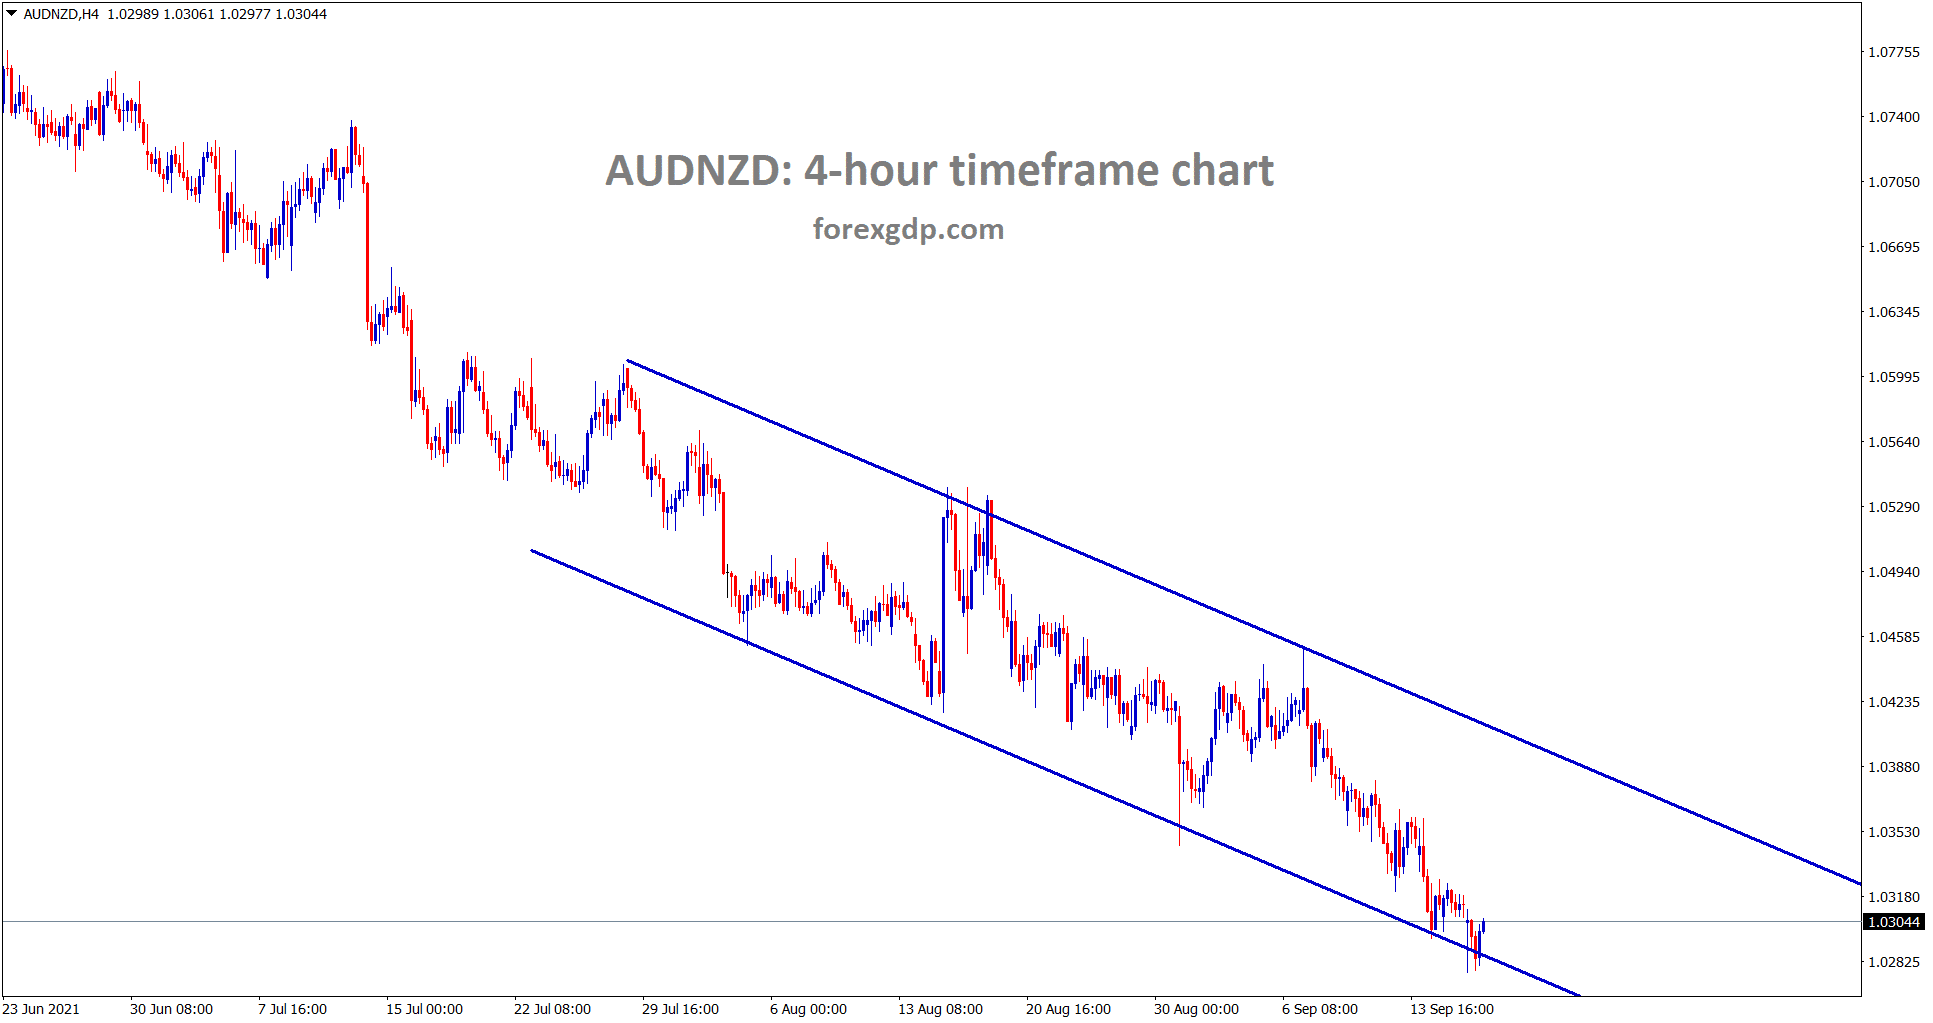 AUDNZD is moving in a descending channel range